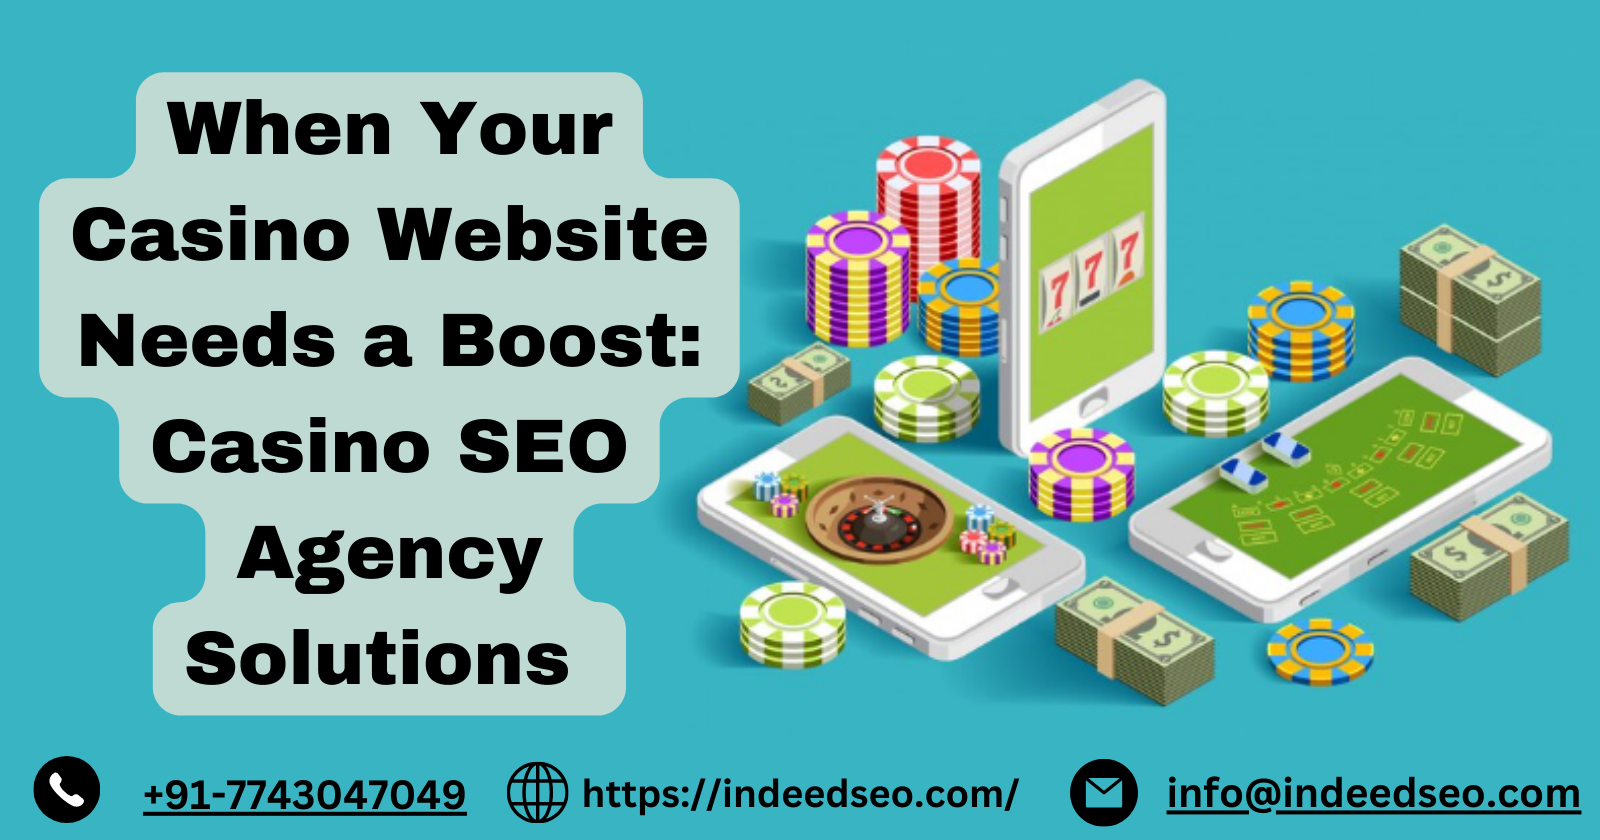 When Your Casino Website Needs a Boost Casino SEO Agency Solutions